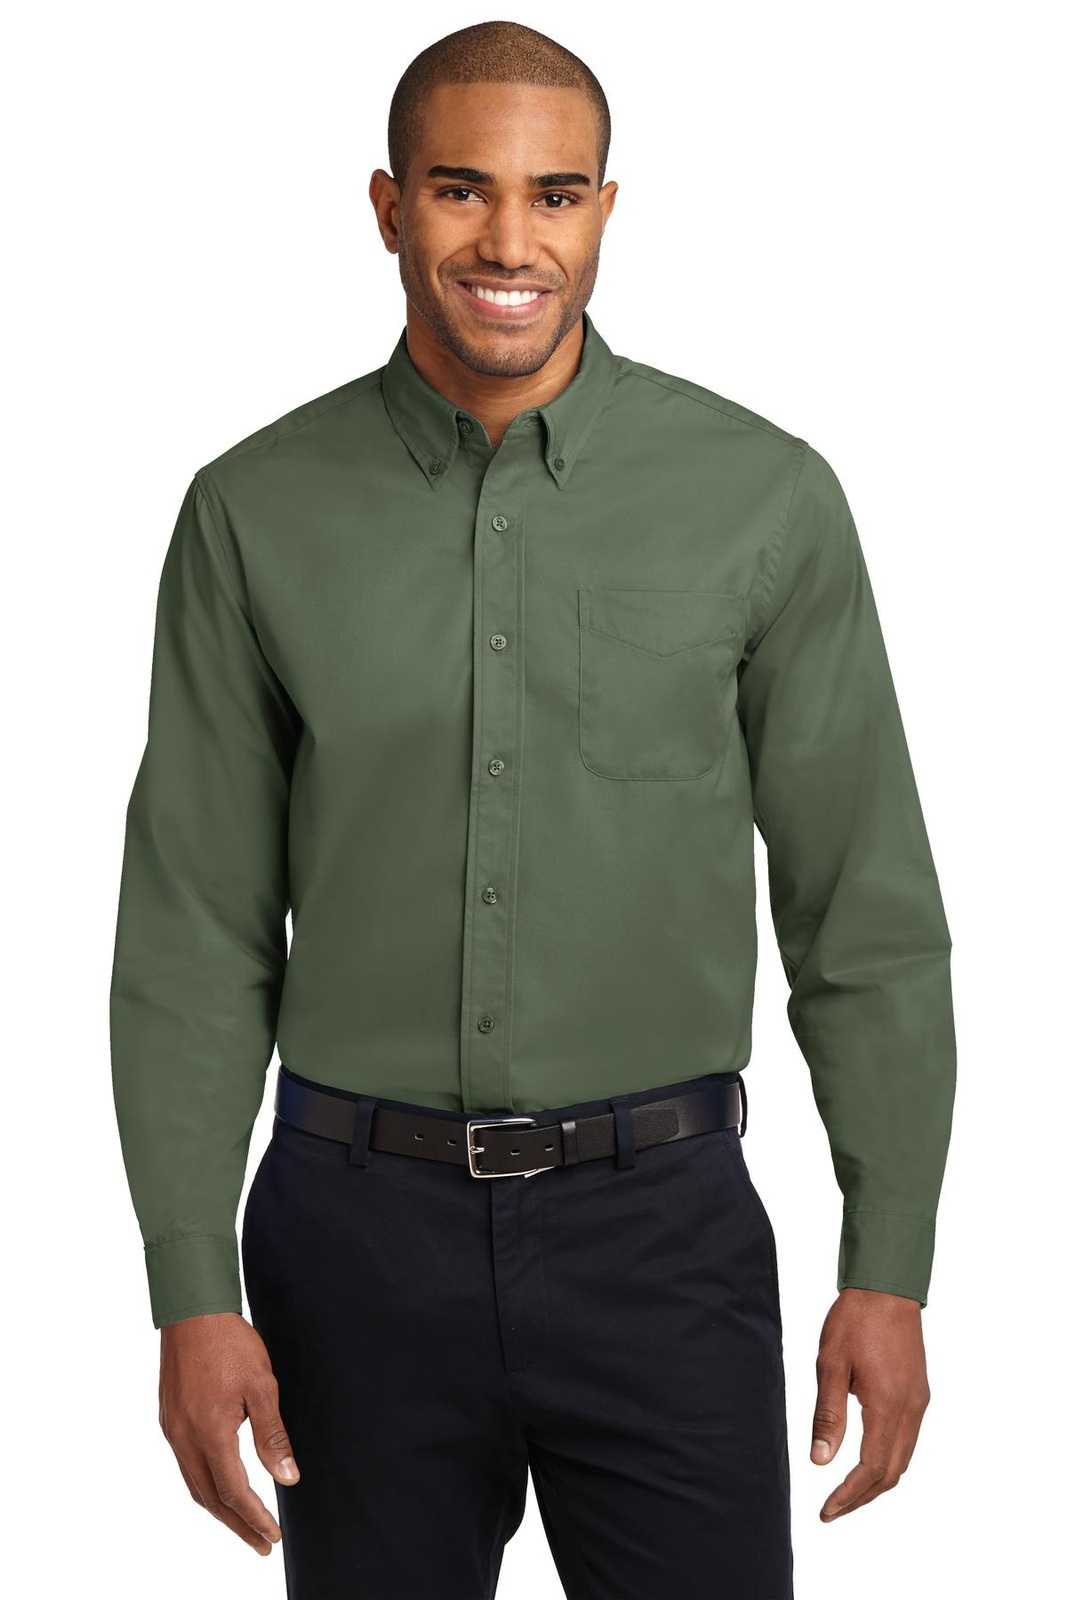 Port Authority S608 Long Sleeve Easy Care Shirt - Clover Green - HIT a Double - 1